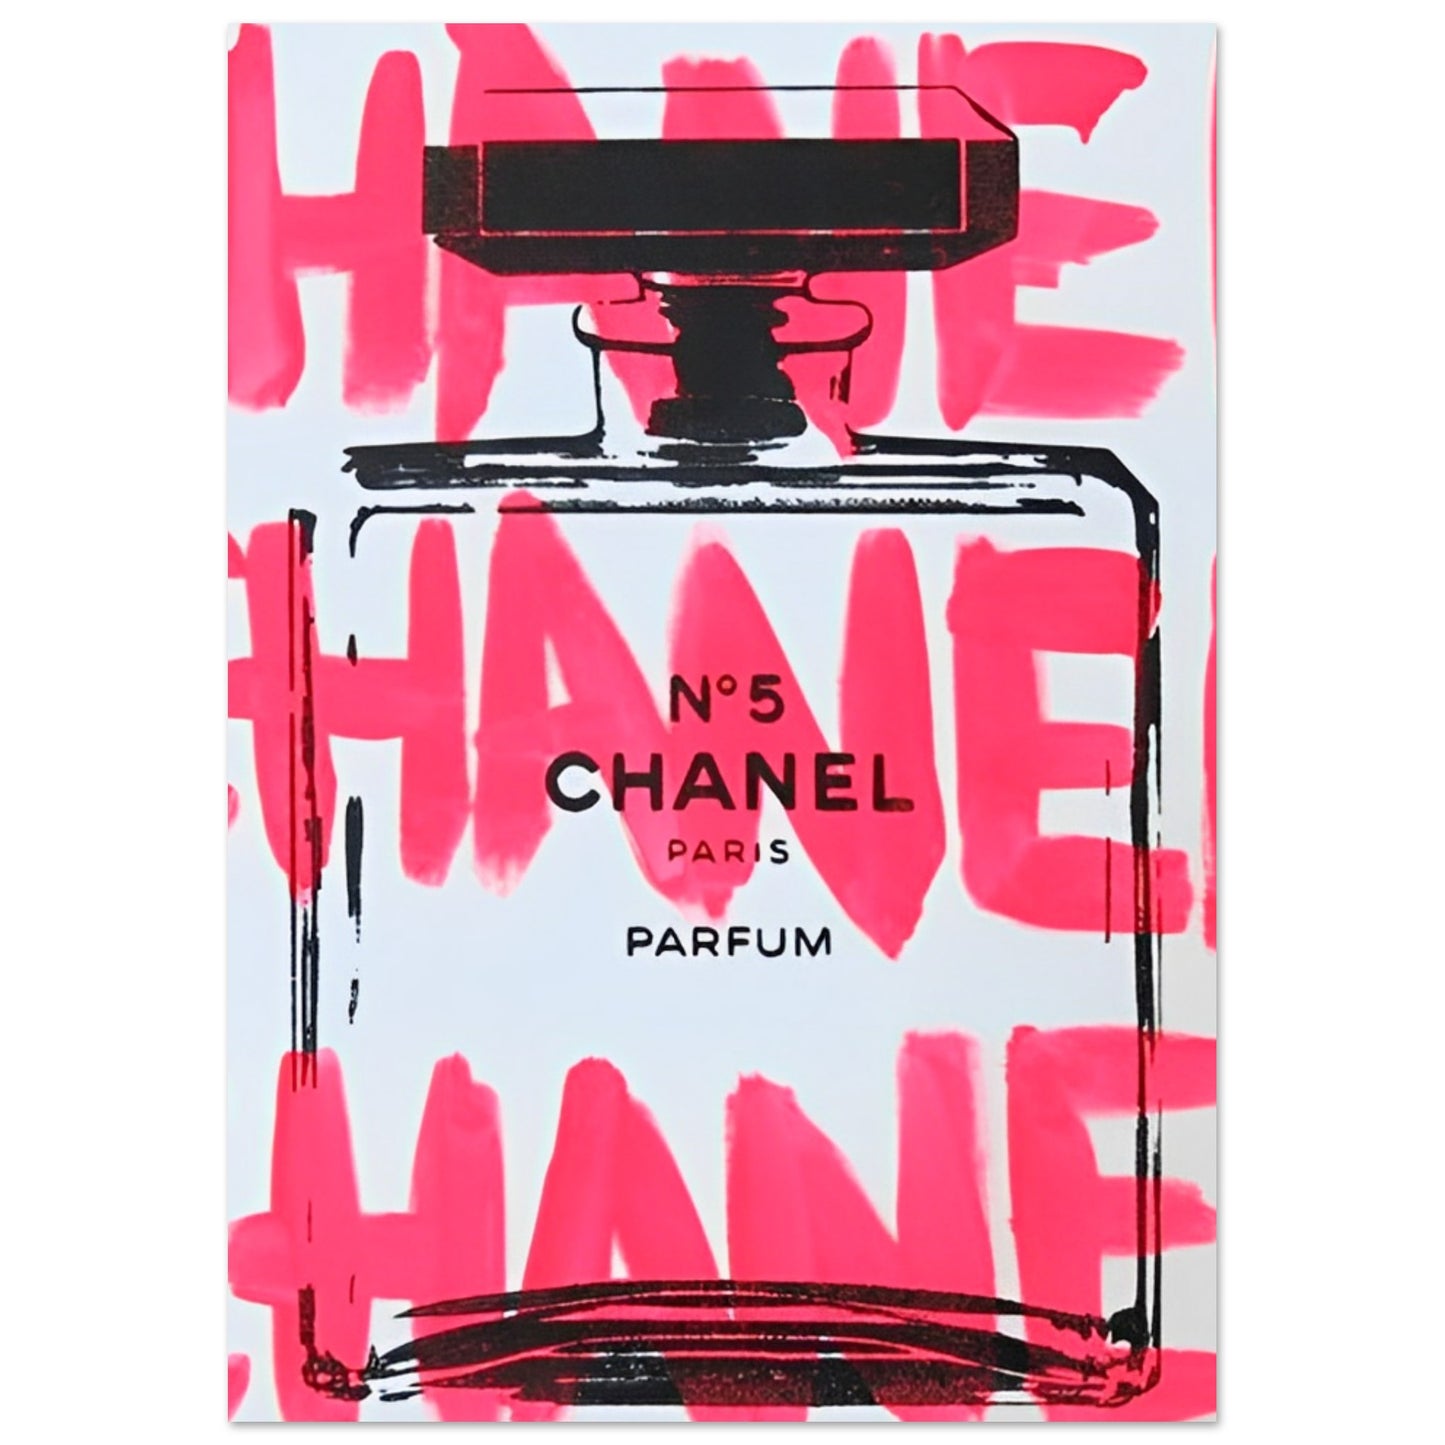 Pink Chanel Perfume - Poster